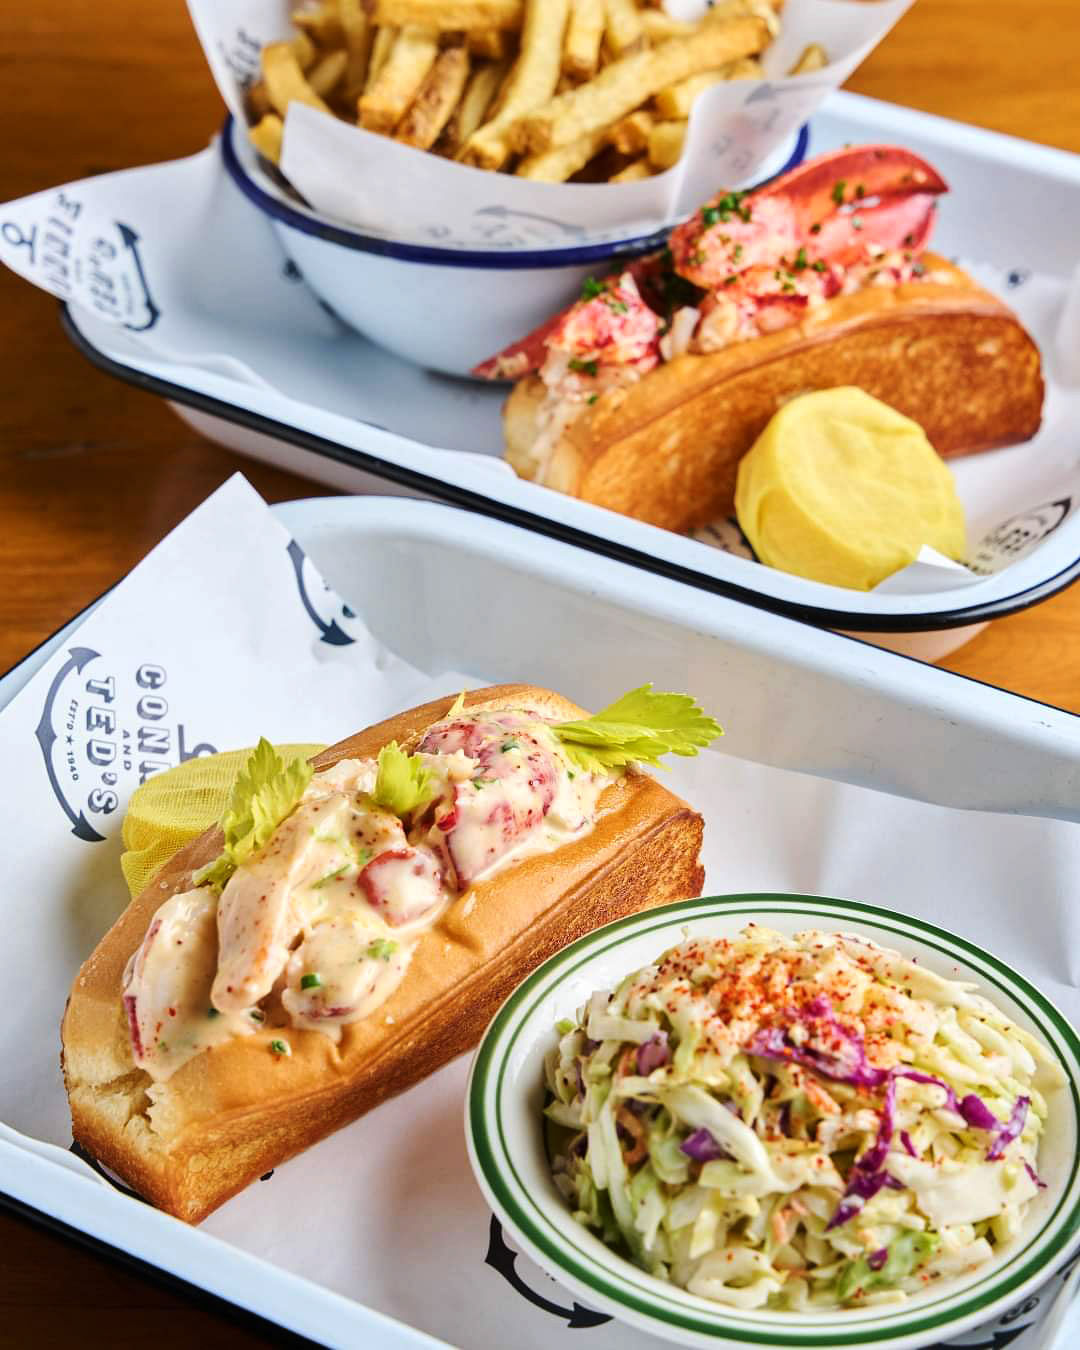 Connie and Ted’s lobster rolls in Los Angeles